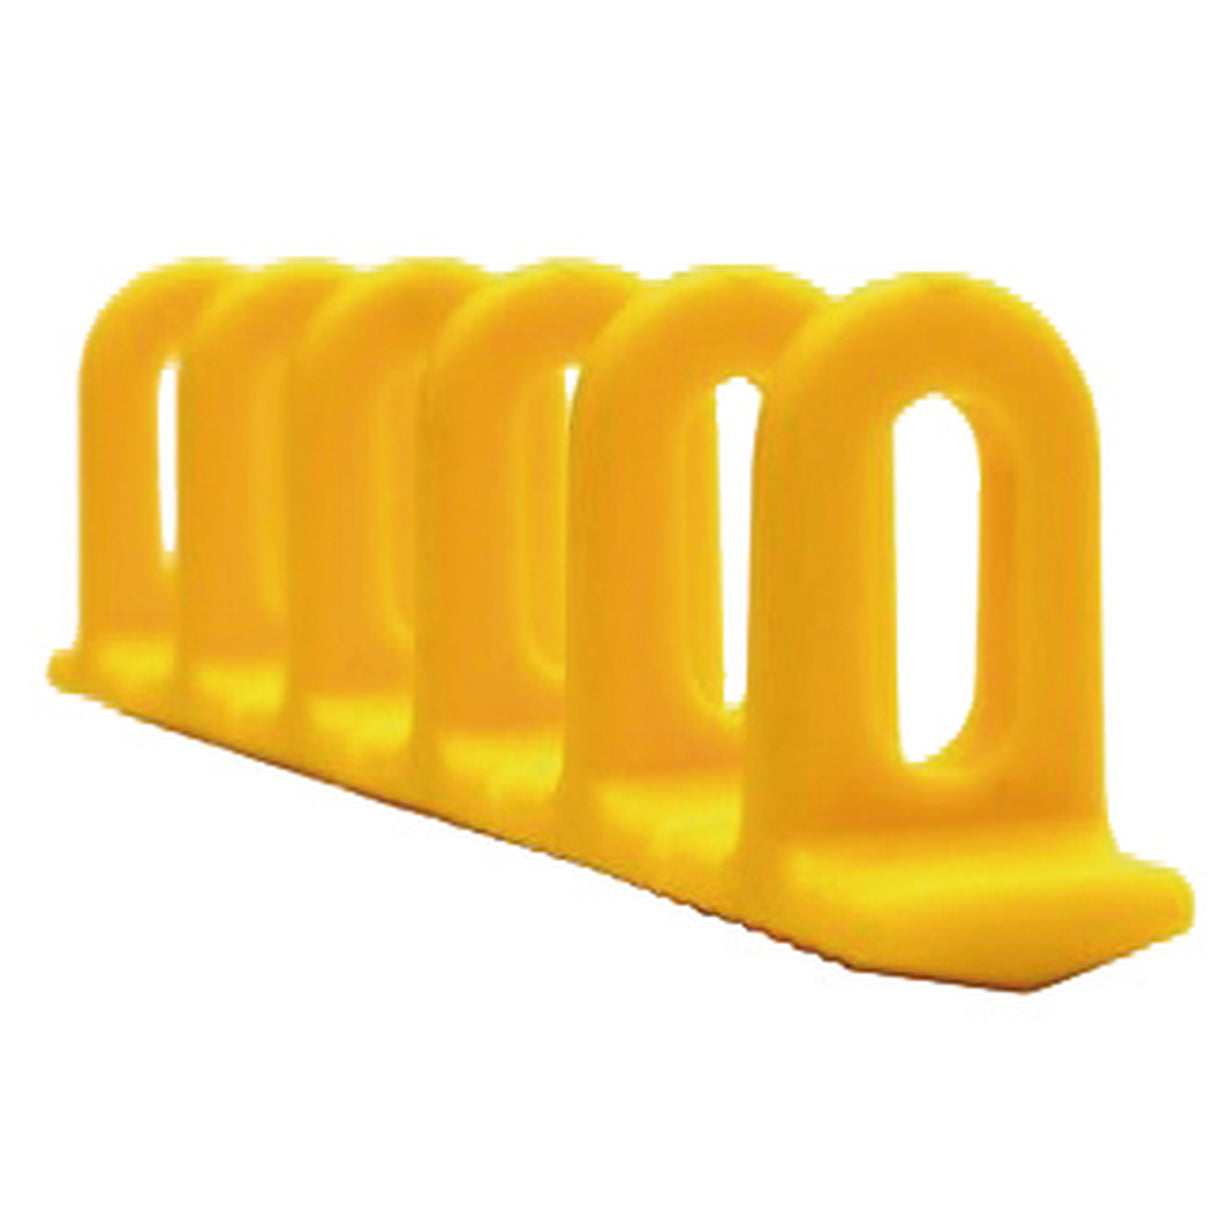 3 YELLOW CONICAL PLASTIC MULTIPADS SIZE 6x22x156mm